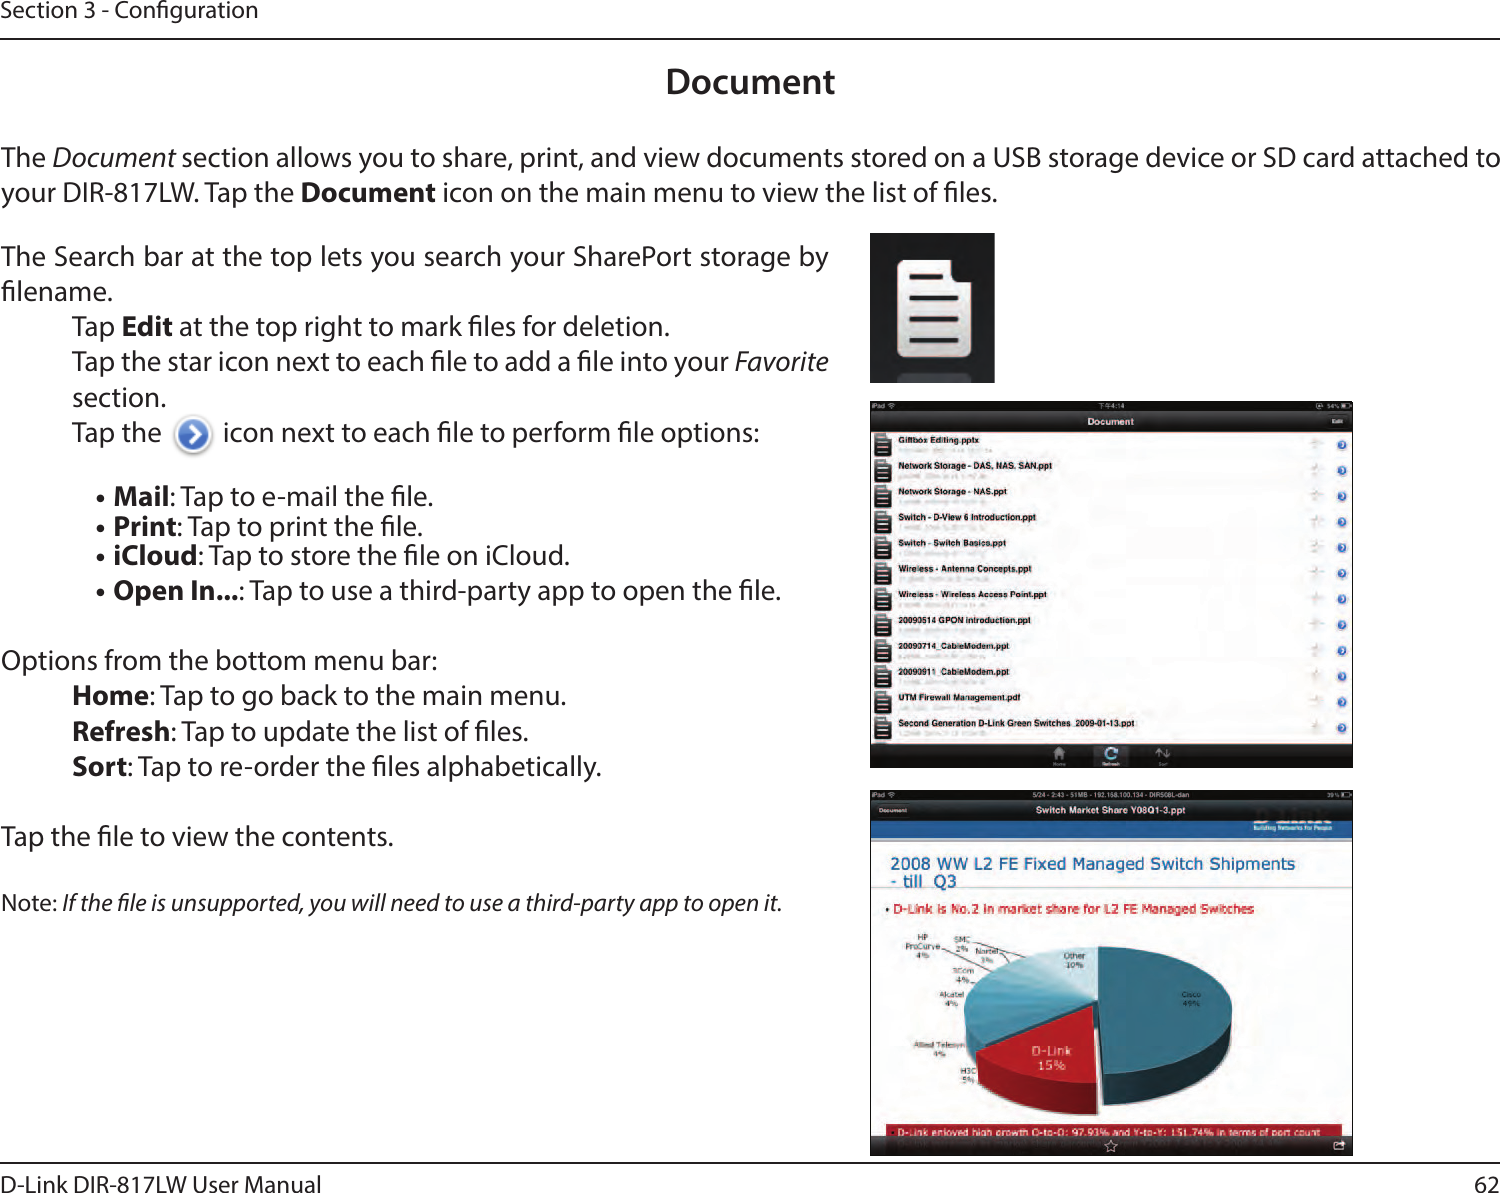 62D-Link DIR-817LW User ManualSection 3 - CongurationDocumentThe Document section allows you to share, print, and view documents stored on a USB storage device or SD card attached to your DIR-817LW. Tap the Document icon on the main menu to view the list of les.The Search bar at the top lets you search your SharePort storage by lename.Tap Edit at the top right to mark les for deletion.Tap the star icon next to each le to add a le into your Favorite section.Tap the   icon next to each le to perform le options:• Mail: Tap to e-mail the le.• Print: Tap to print the le.• iCloud: Tap to store the le on iCloud.• Open In...: Tap to use a third-party app to open the le.Options from the bottom menu bar:Home: Tap to go back to the main menu.Refresh: Tap to update the list of les.Sort: Tap to re-order the les alphabetically.Tap the le to view the contents.Note: If the le is unsupported, you will need to use a third-party app to open it.